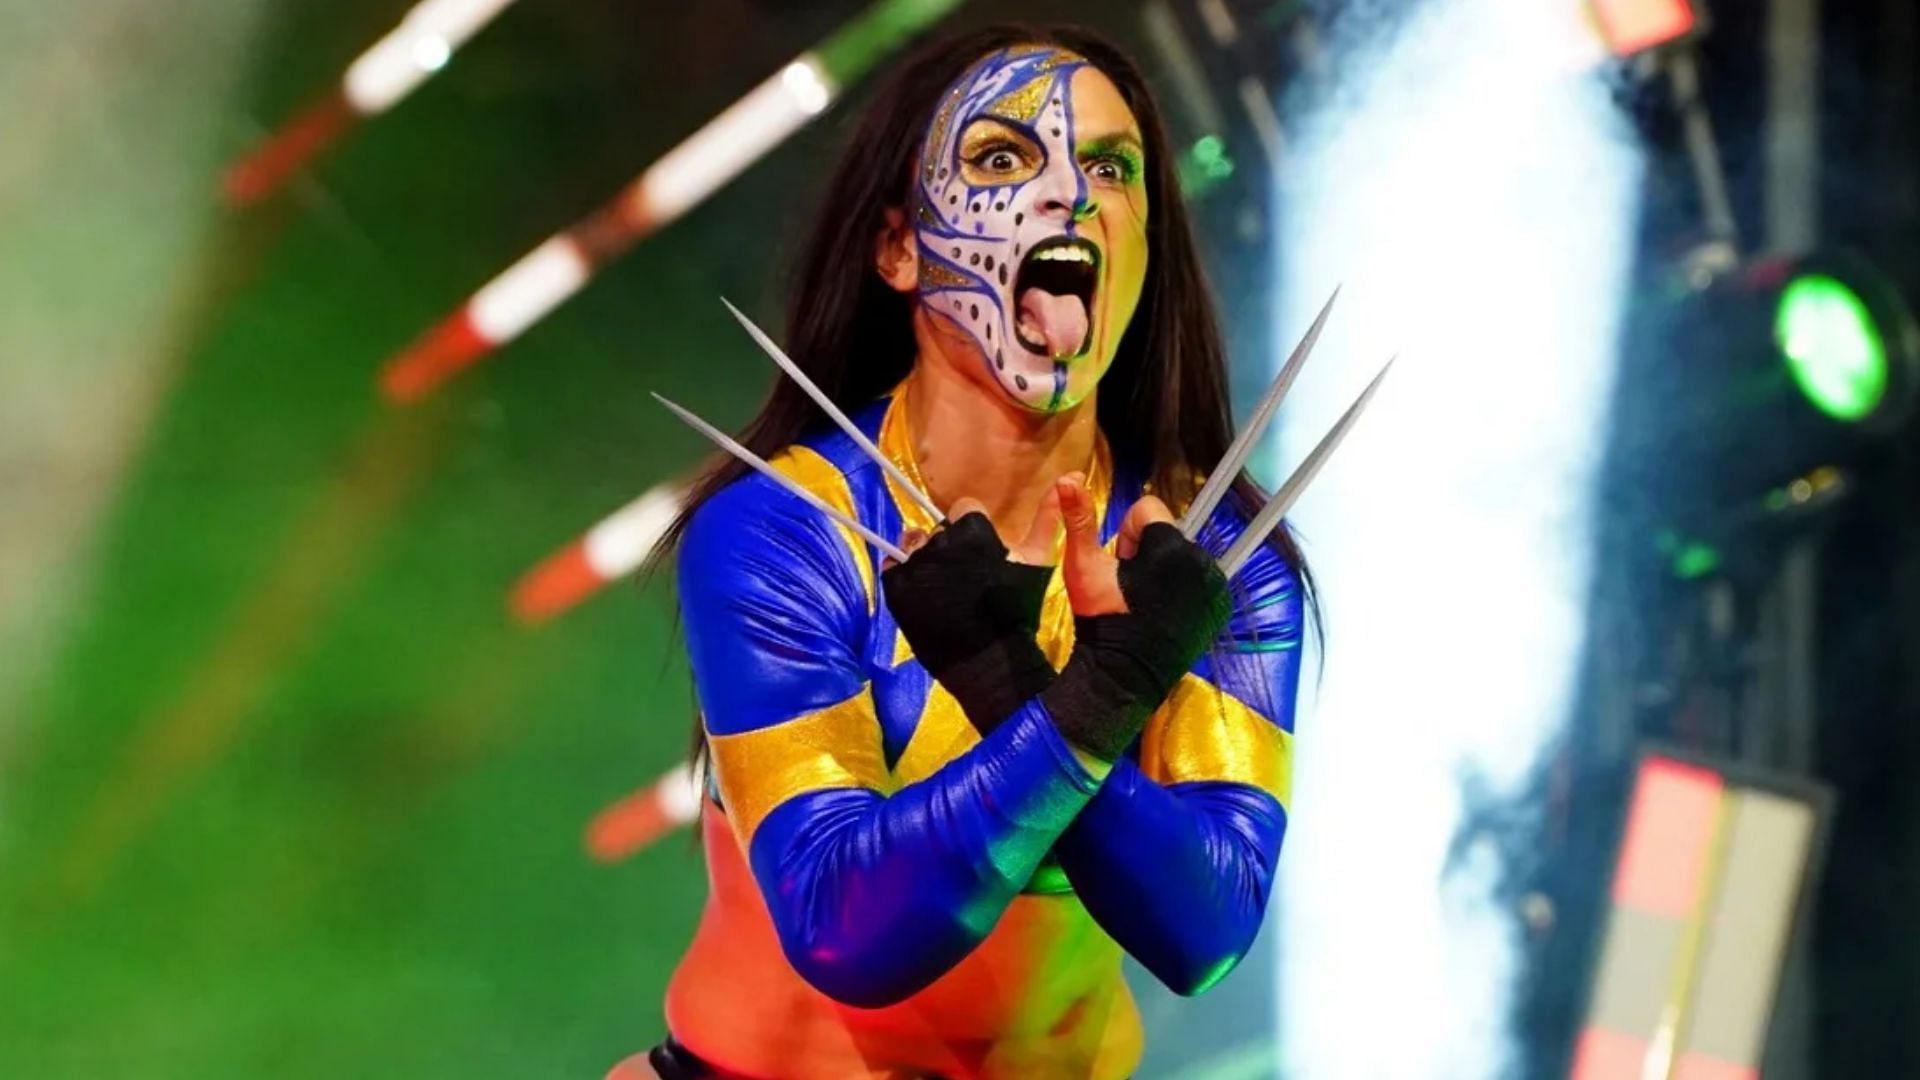 Thunder Rosa relinquished the AEW Women